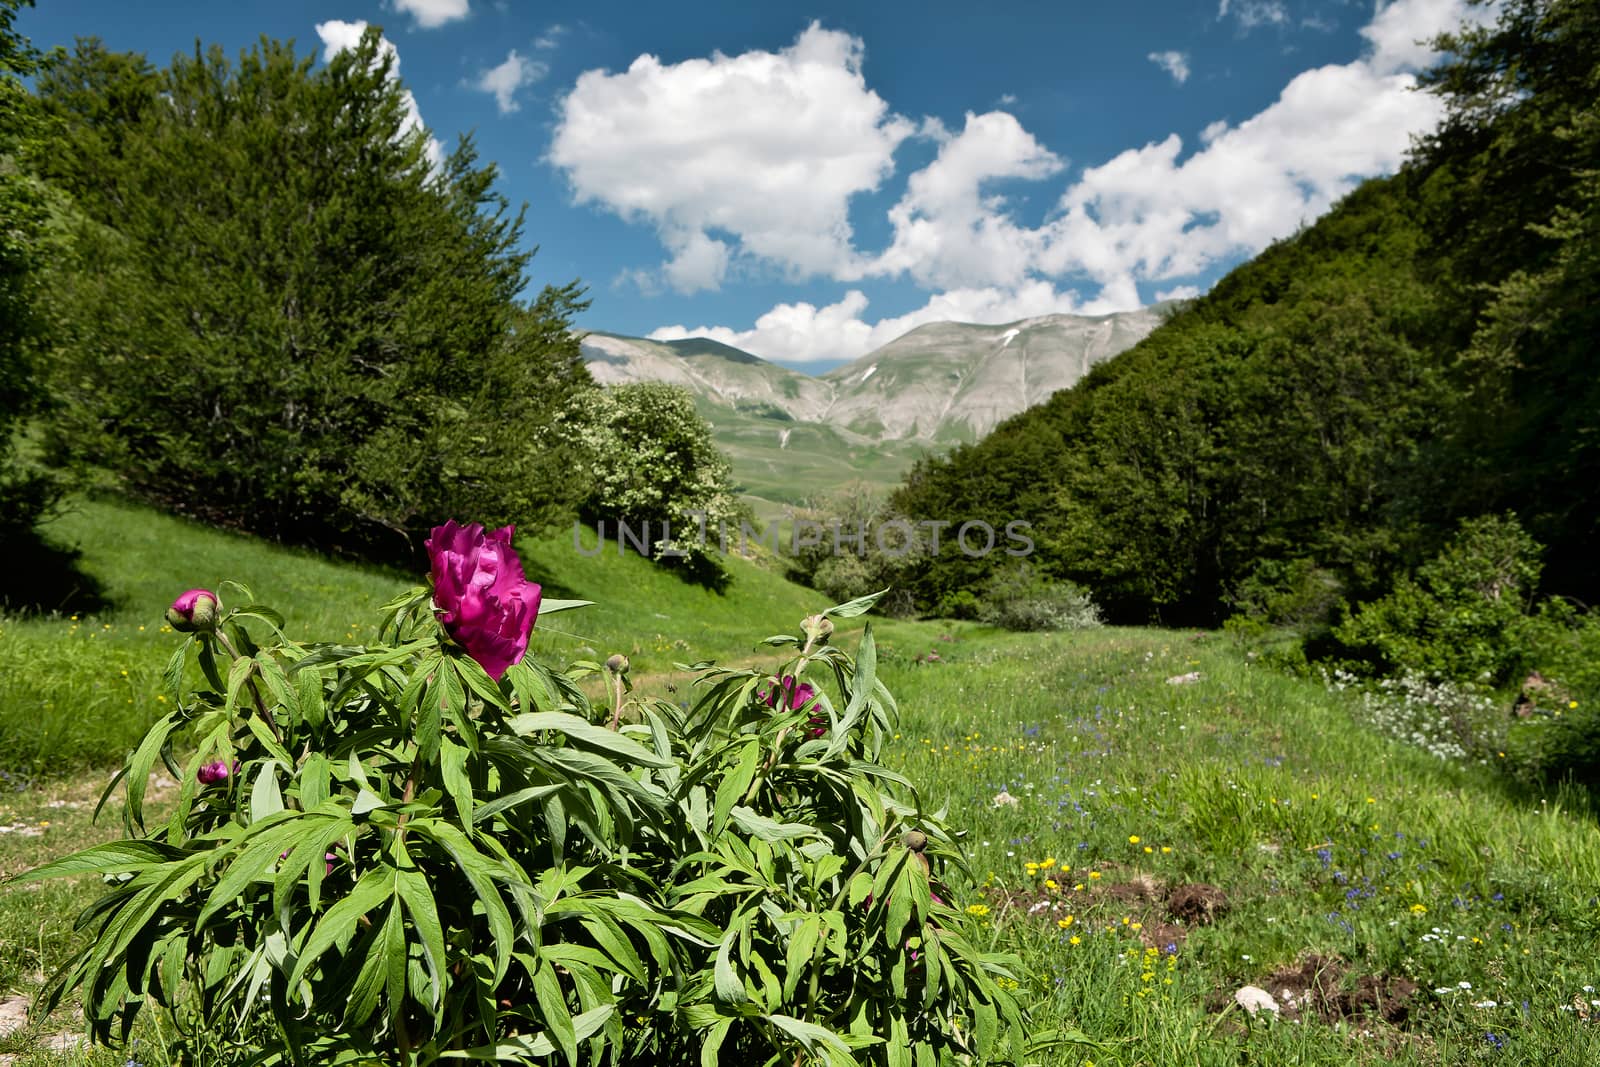 A beautiful peony flower in the Sibillini Mountains